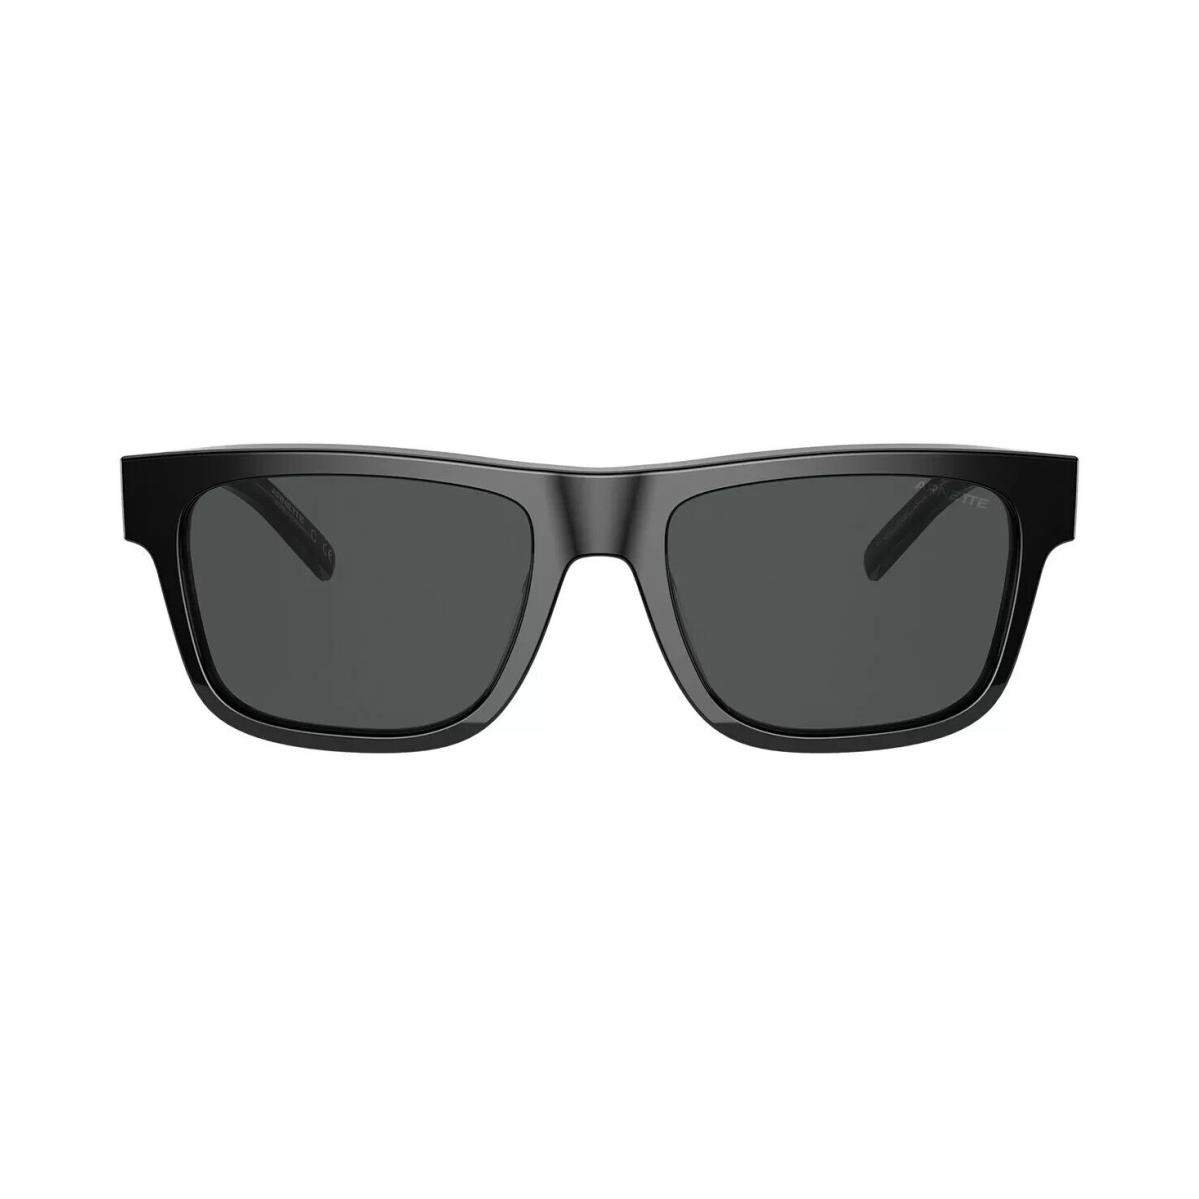 Arnette Post Malone Sunglasses 4279-1200/87 Sustainable Collection Black